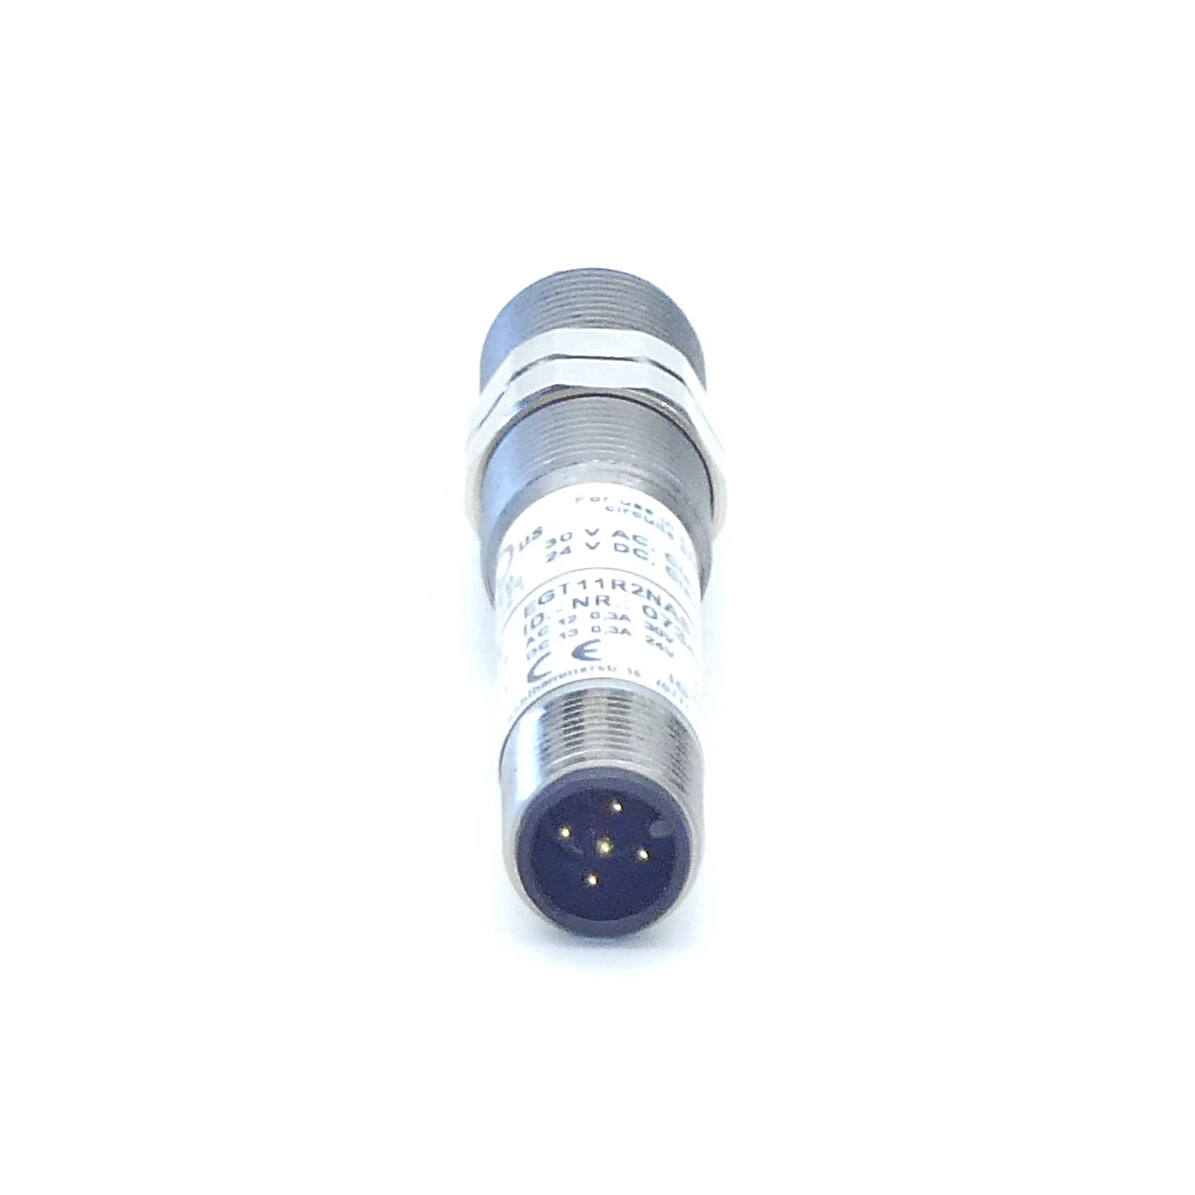 Precision single hole fixing limit switch EGT11R2NAS1 